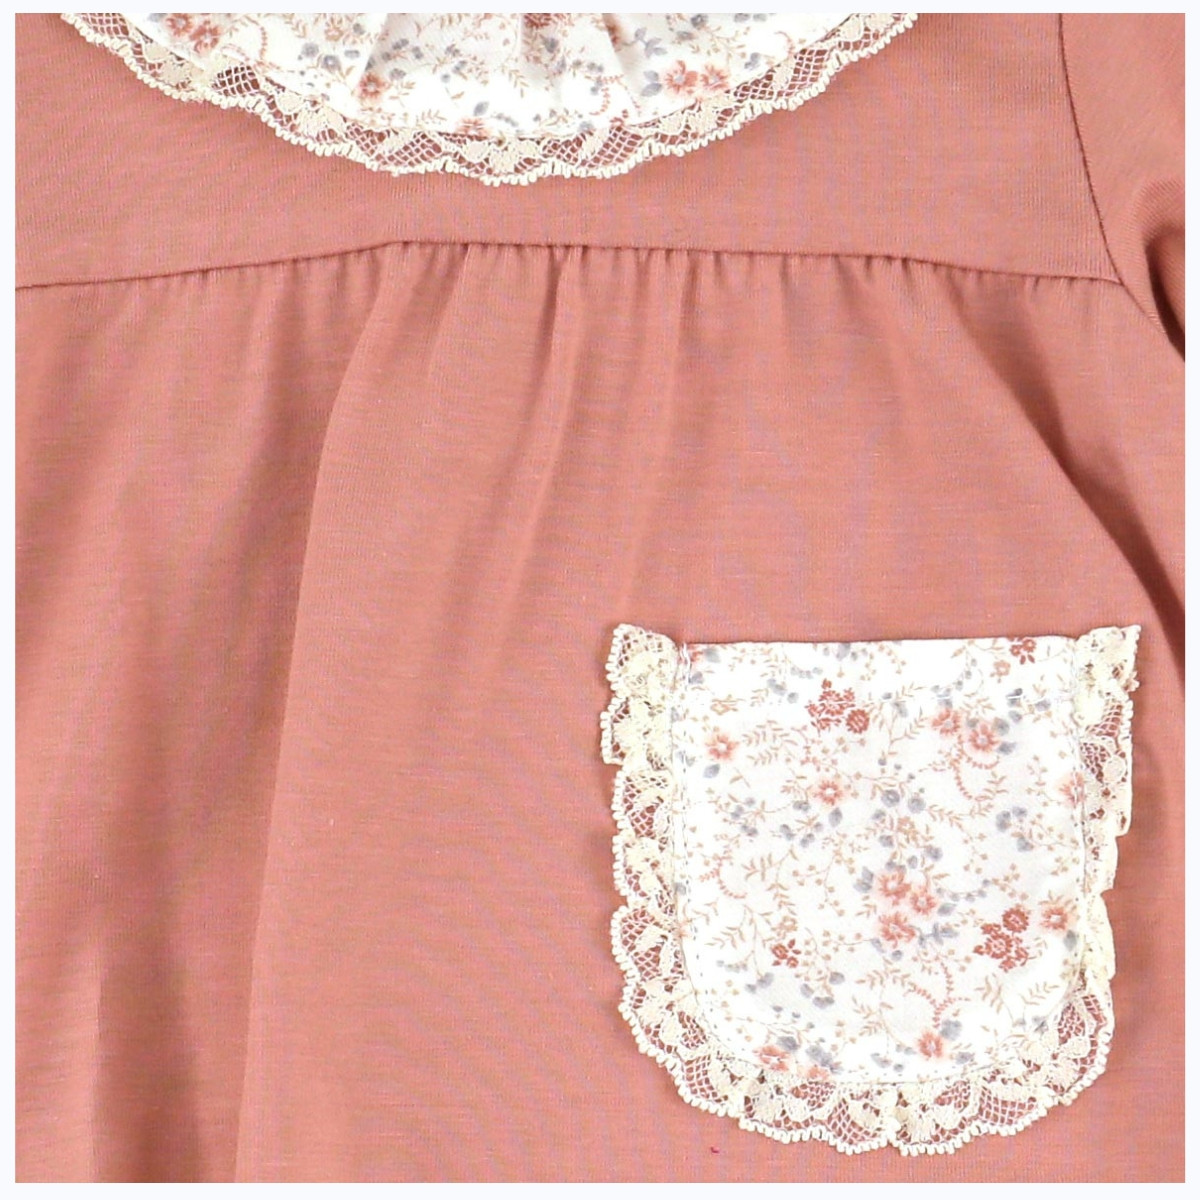 LACE POCKET BLOUSE AND KNICKERS BABYFERR - 2